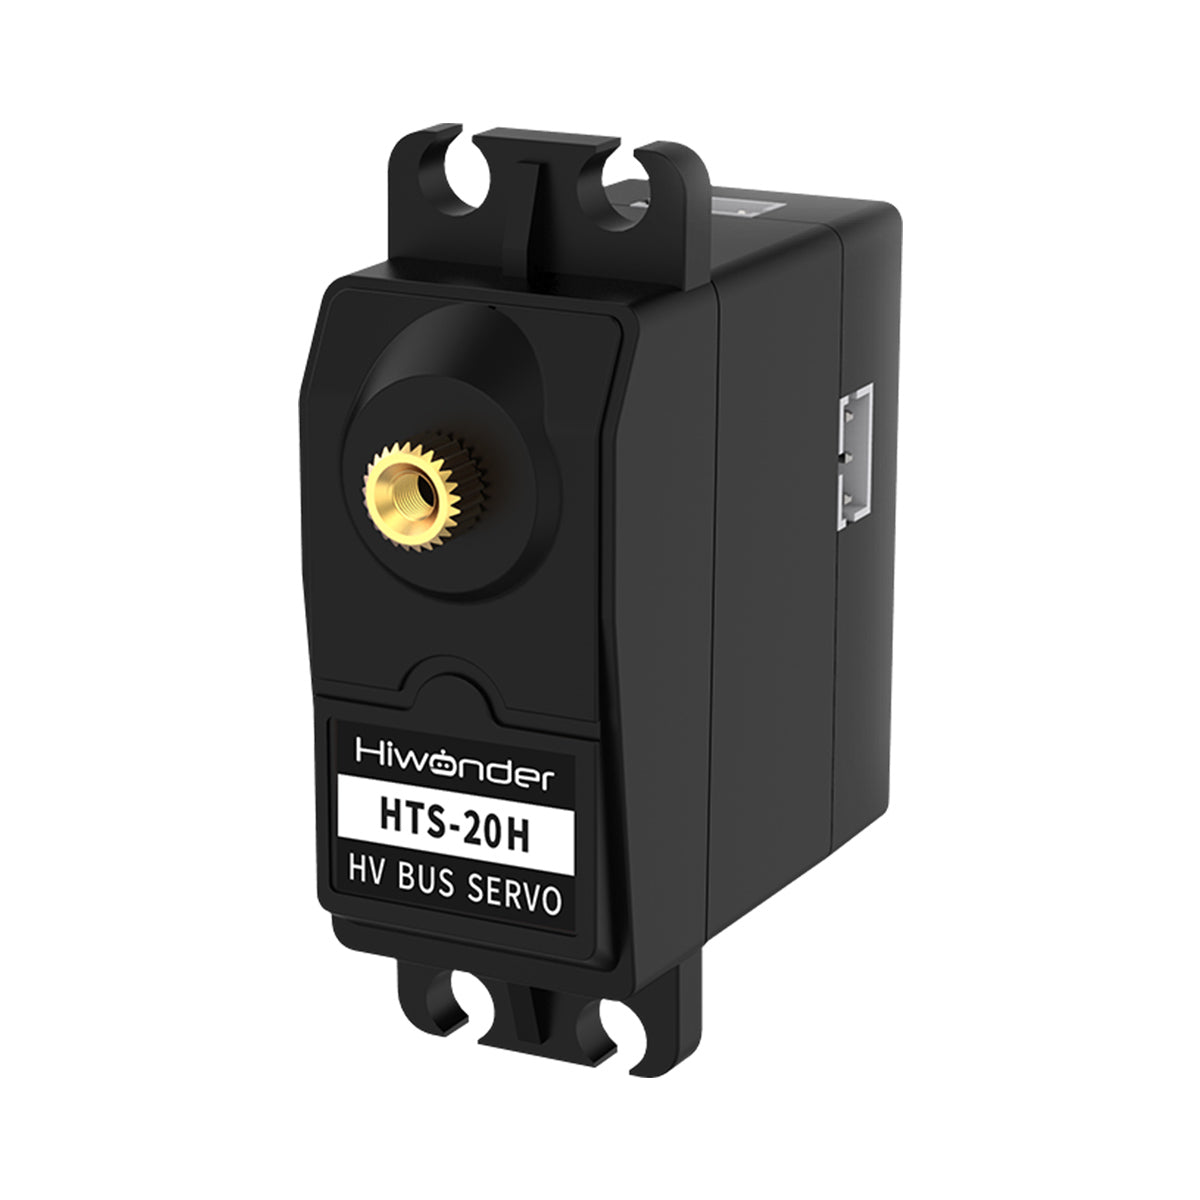 Hiwonder HTS-20H Serial Bus High Voltage Servo with 20KG Torque and Data Feedback Function